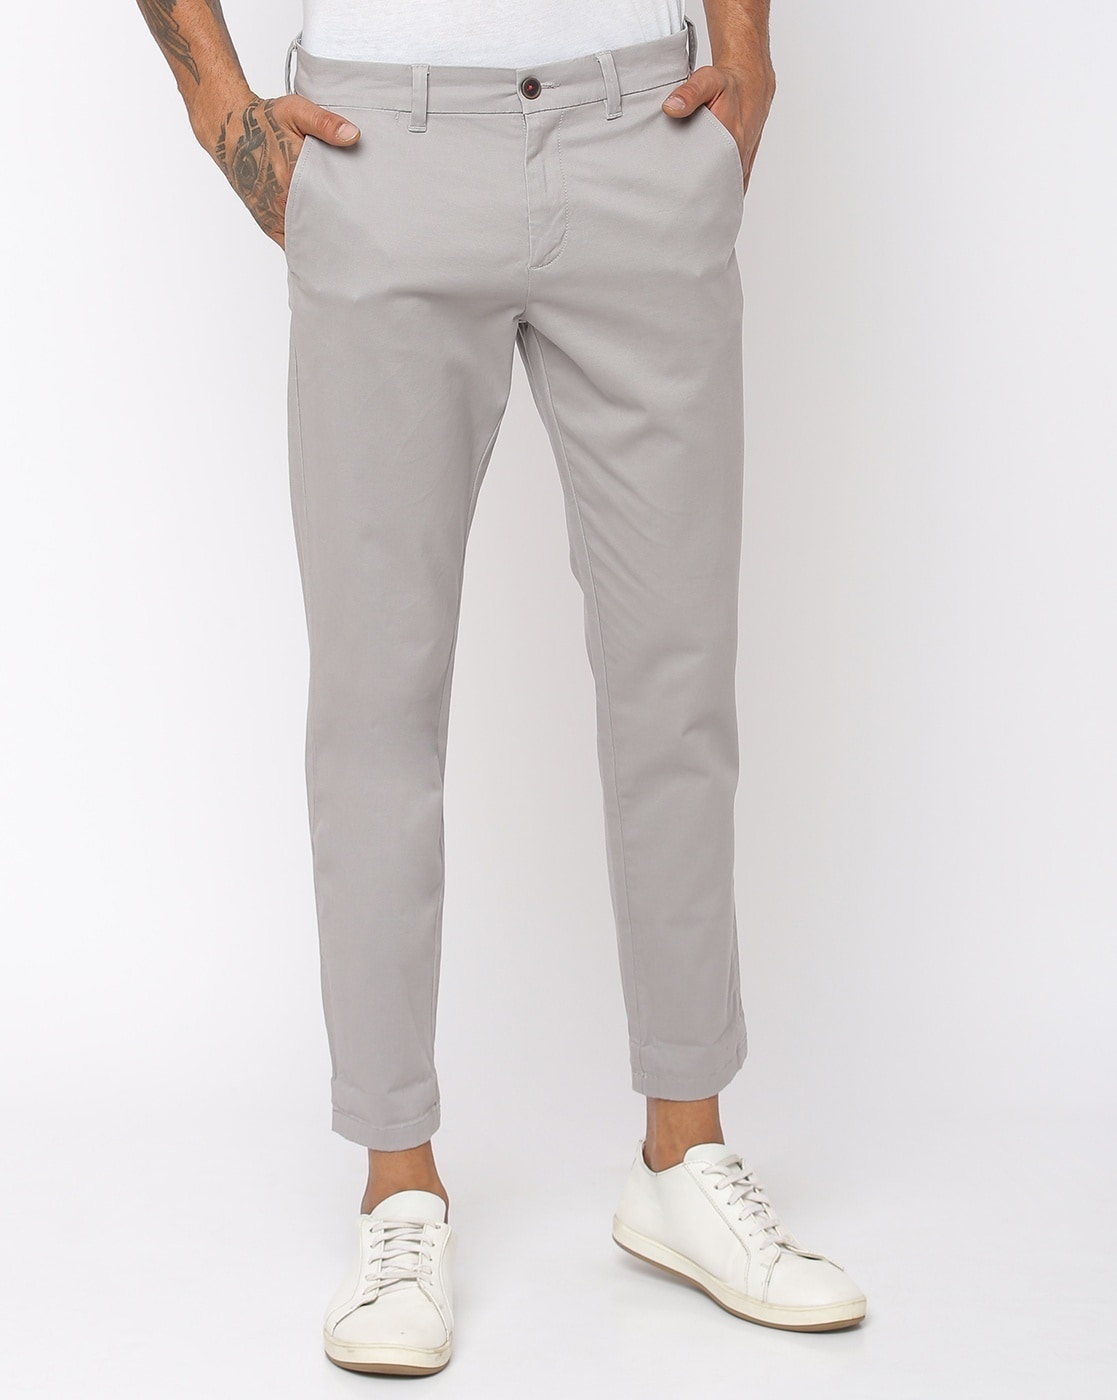 Buy INTUNE Steel Grey Slim Fit Cropped Stretch Cotton Chinos | Shoppers Stop